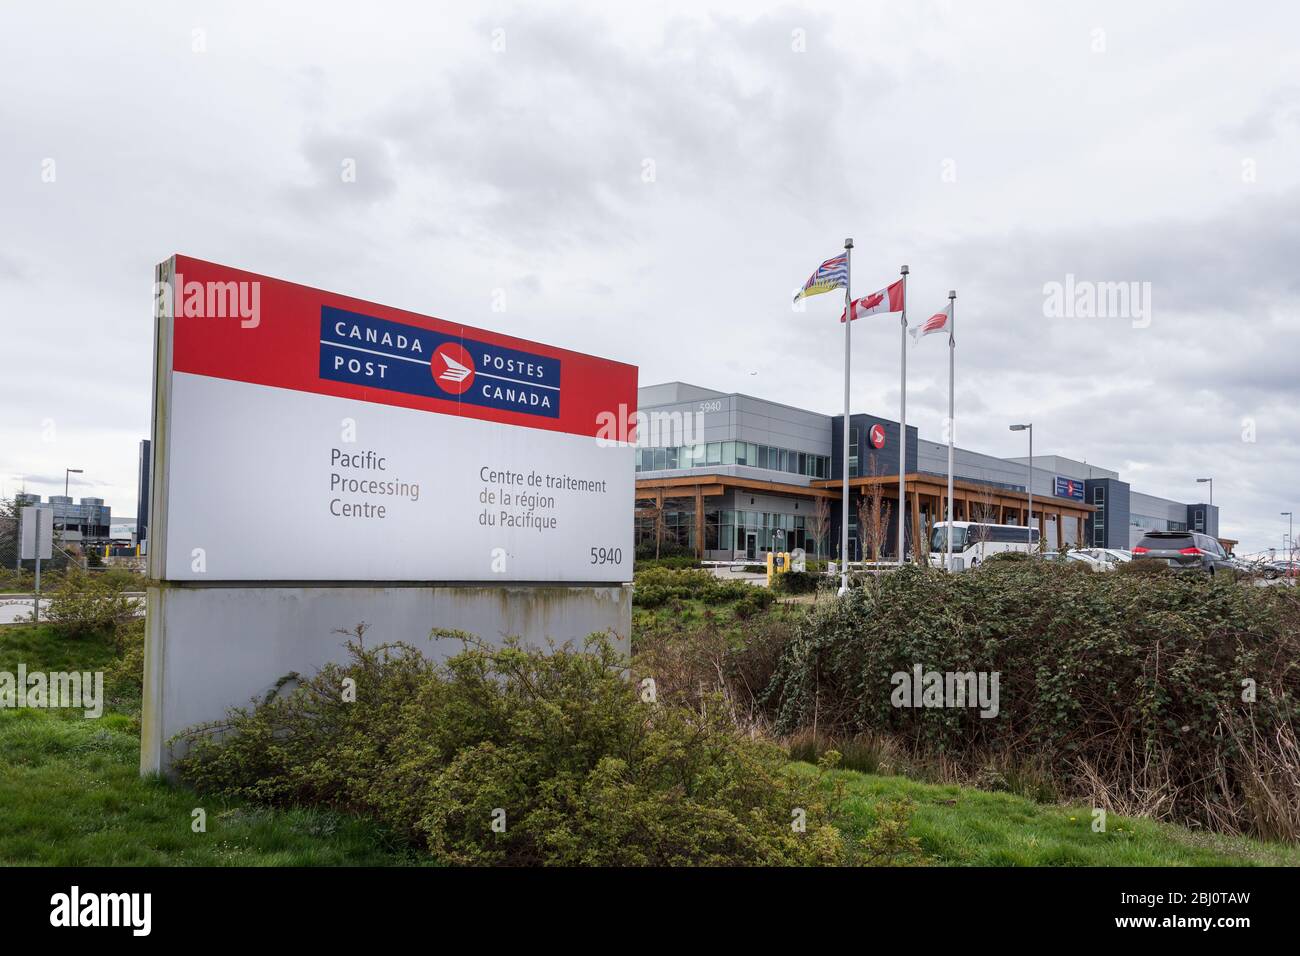 RICHMOND, BC, CANADA - MAR 29, 2020: The pacifc processing center for CanadaPost near YVR. Stock Photo